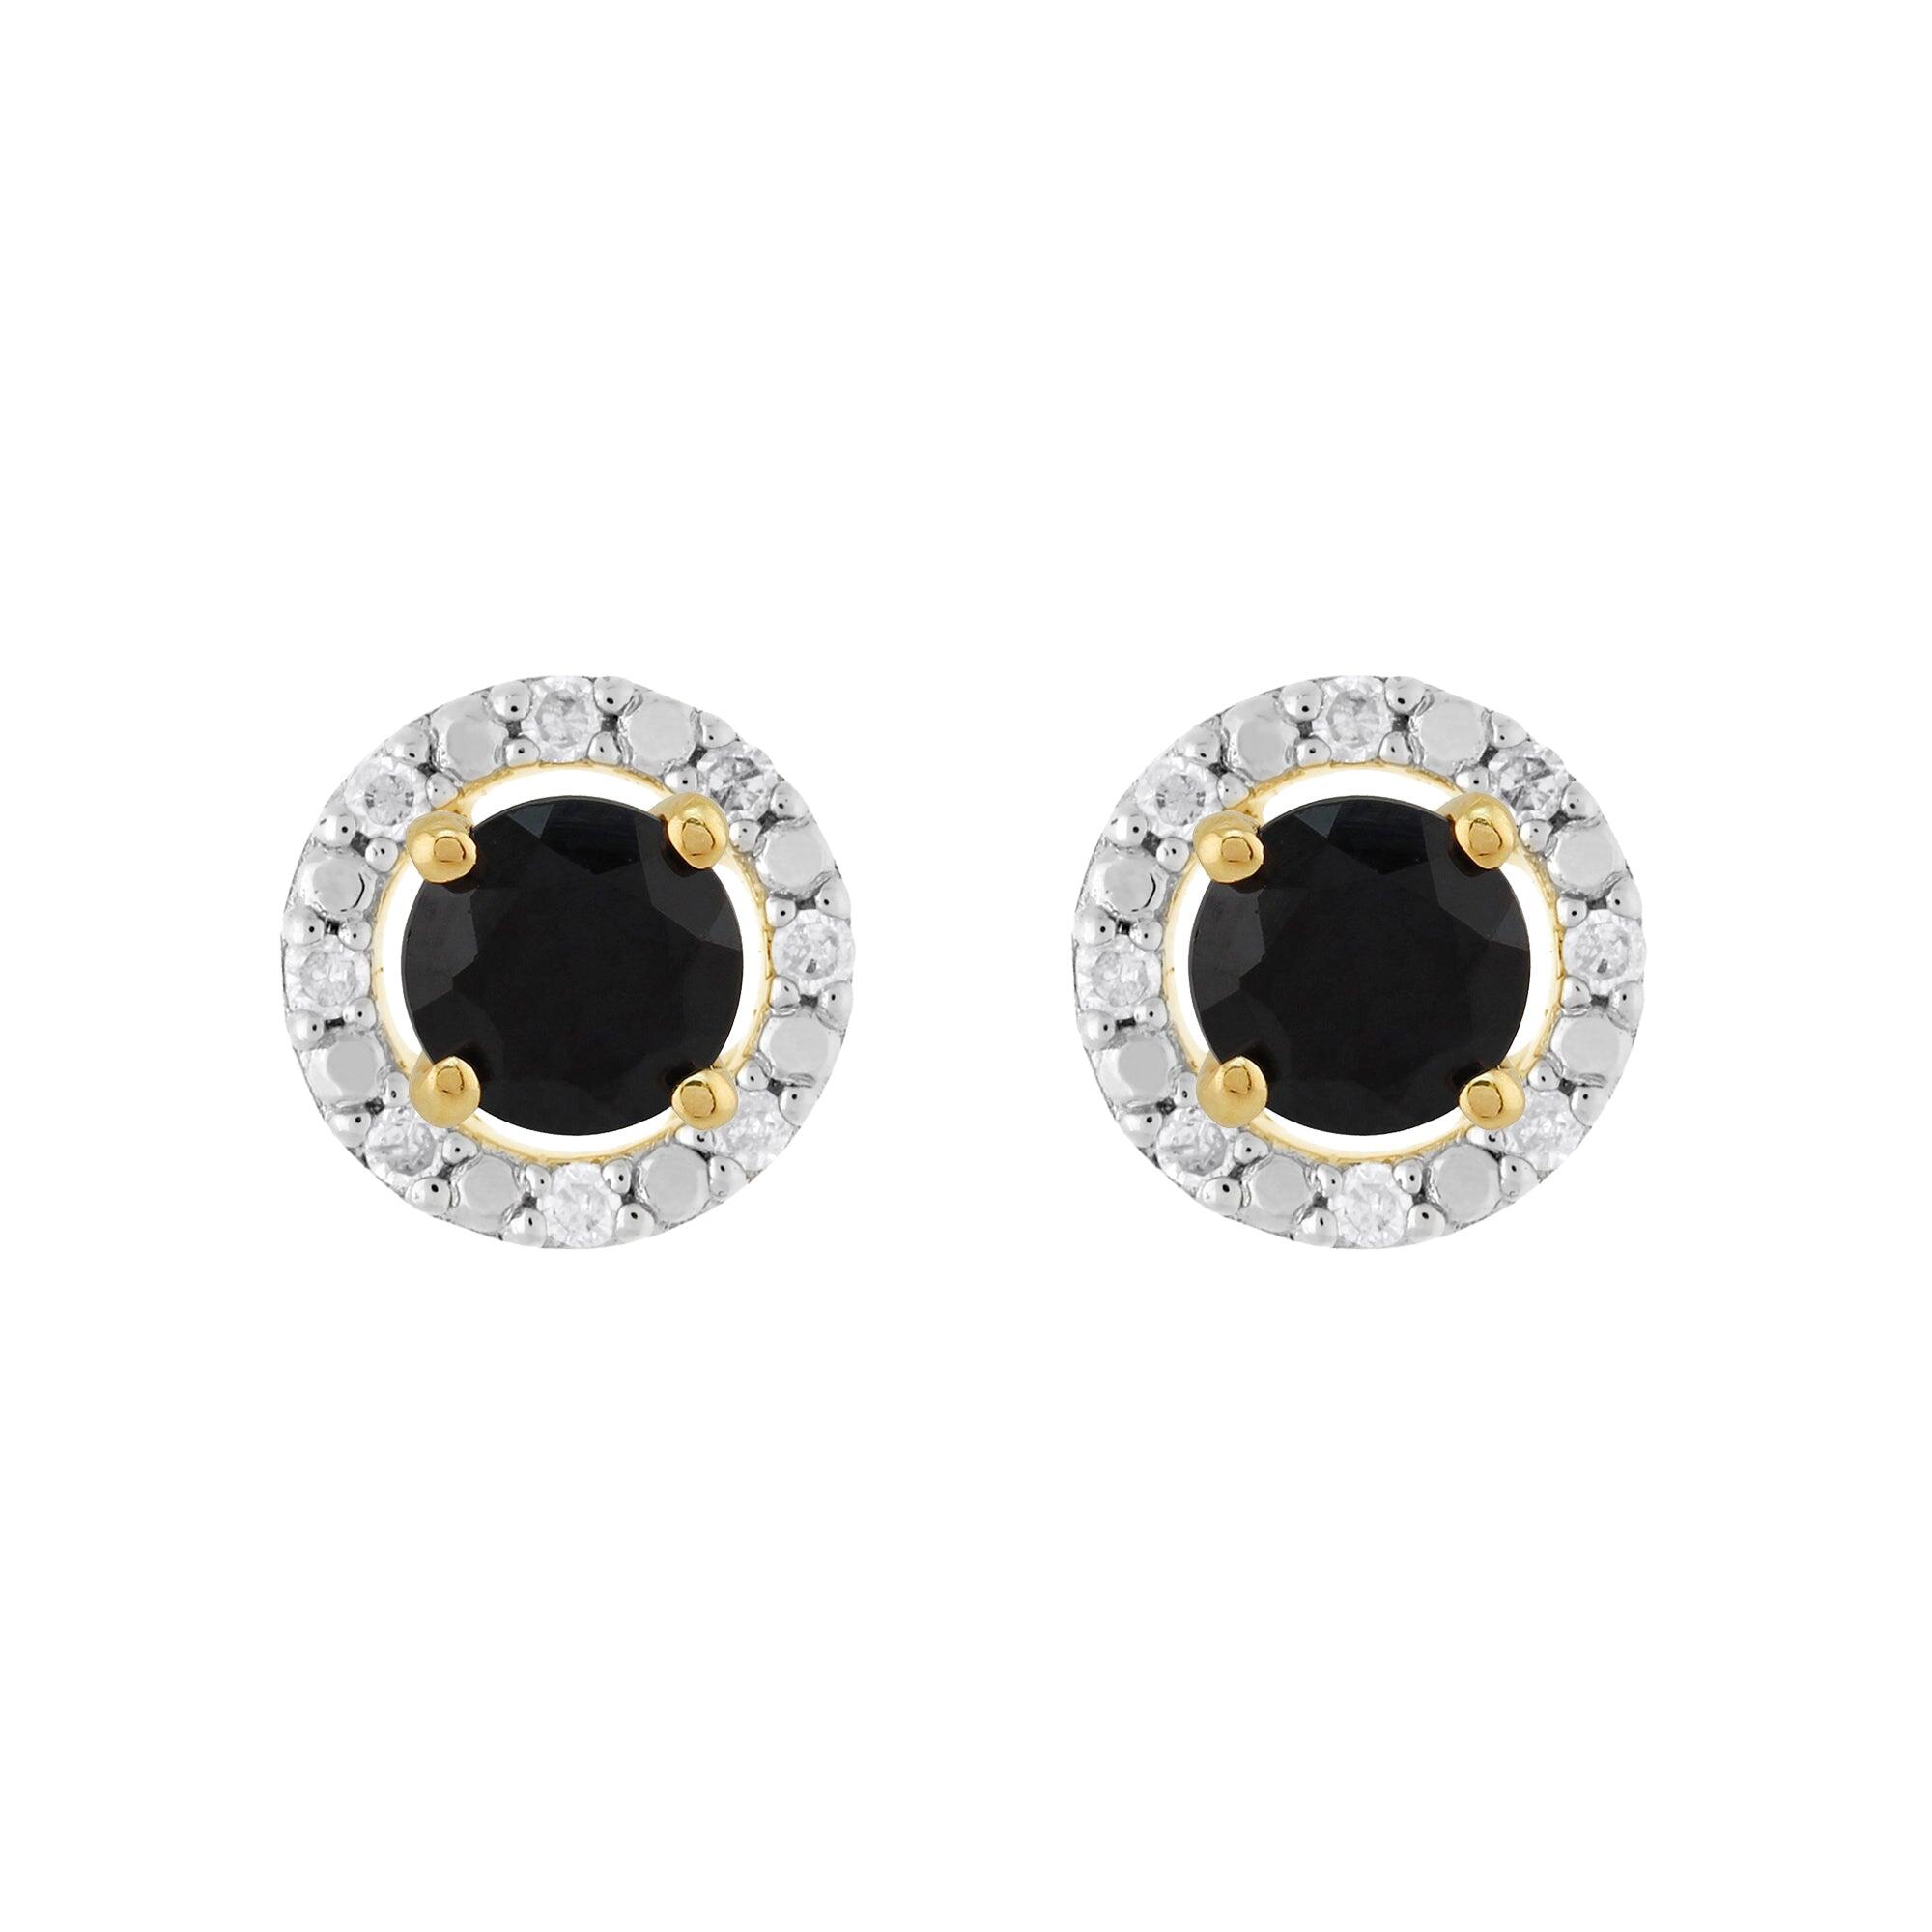 Classic Round Dark Blue Sapphire Stud Earrings with Detachable Diamond Round Earrings Jacket Set in 9ct Yellow Gold